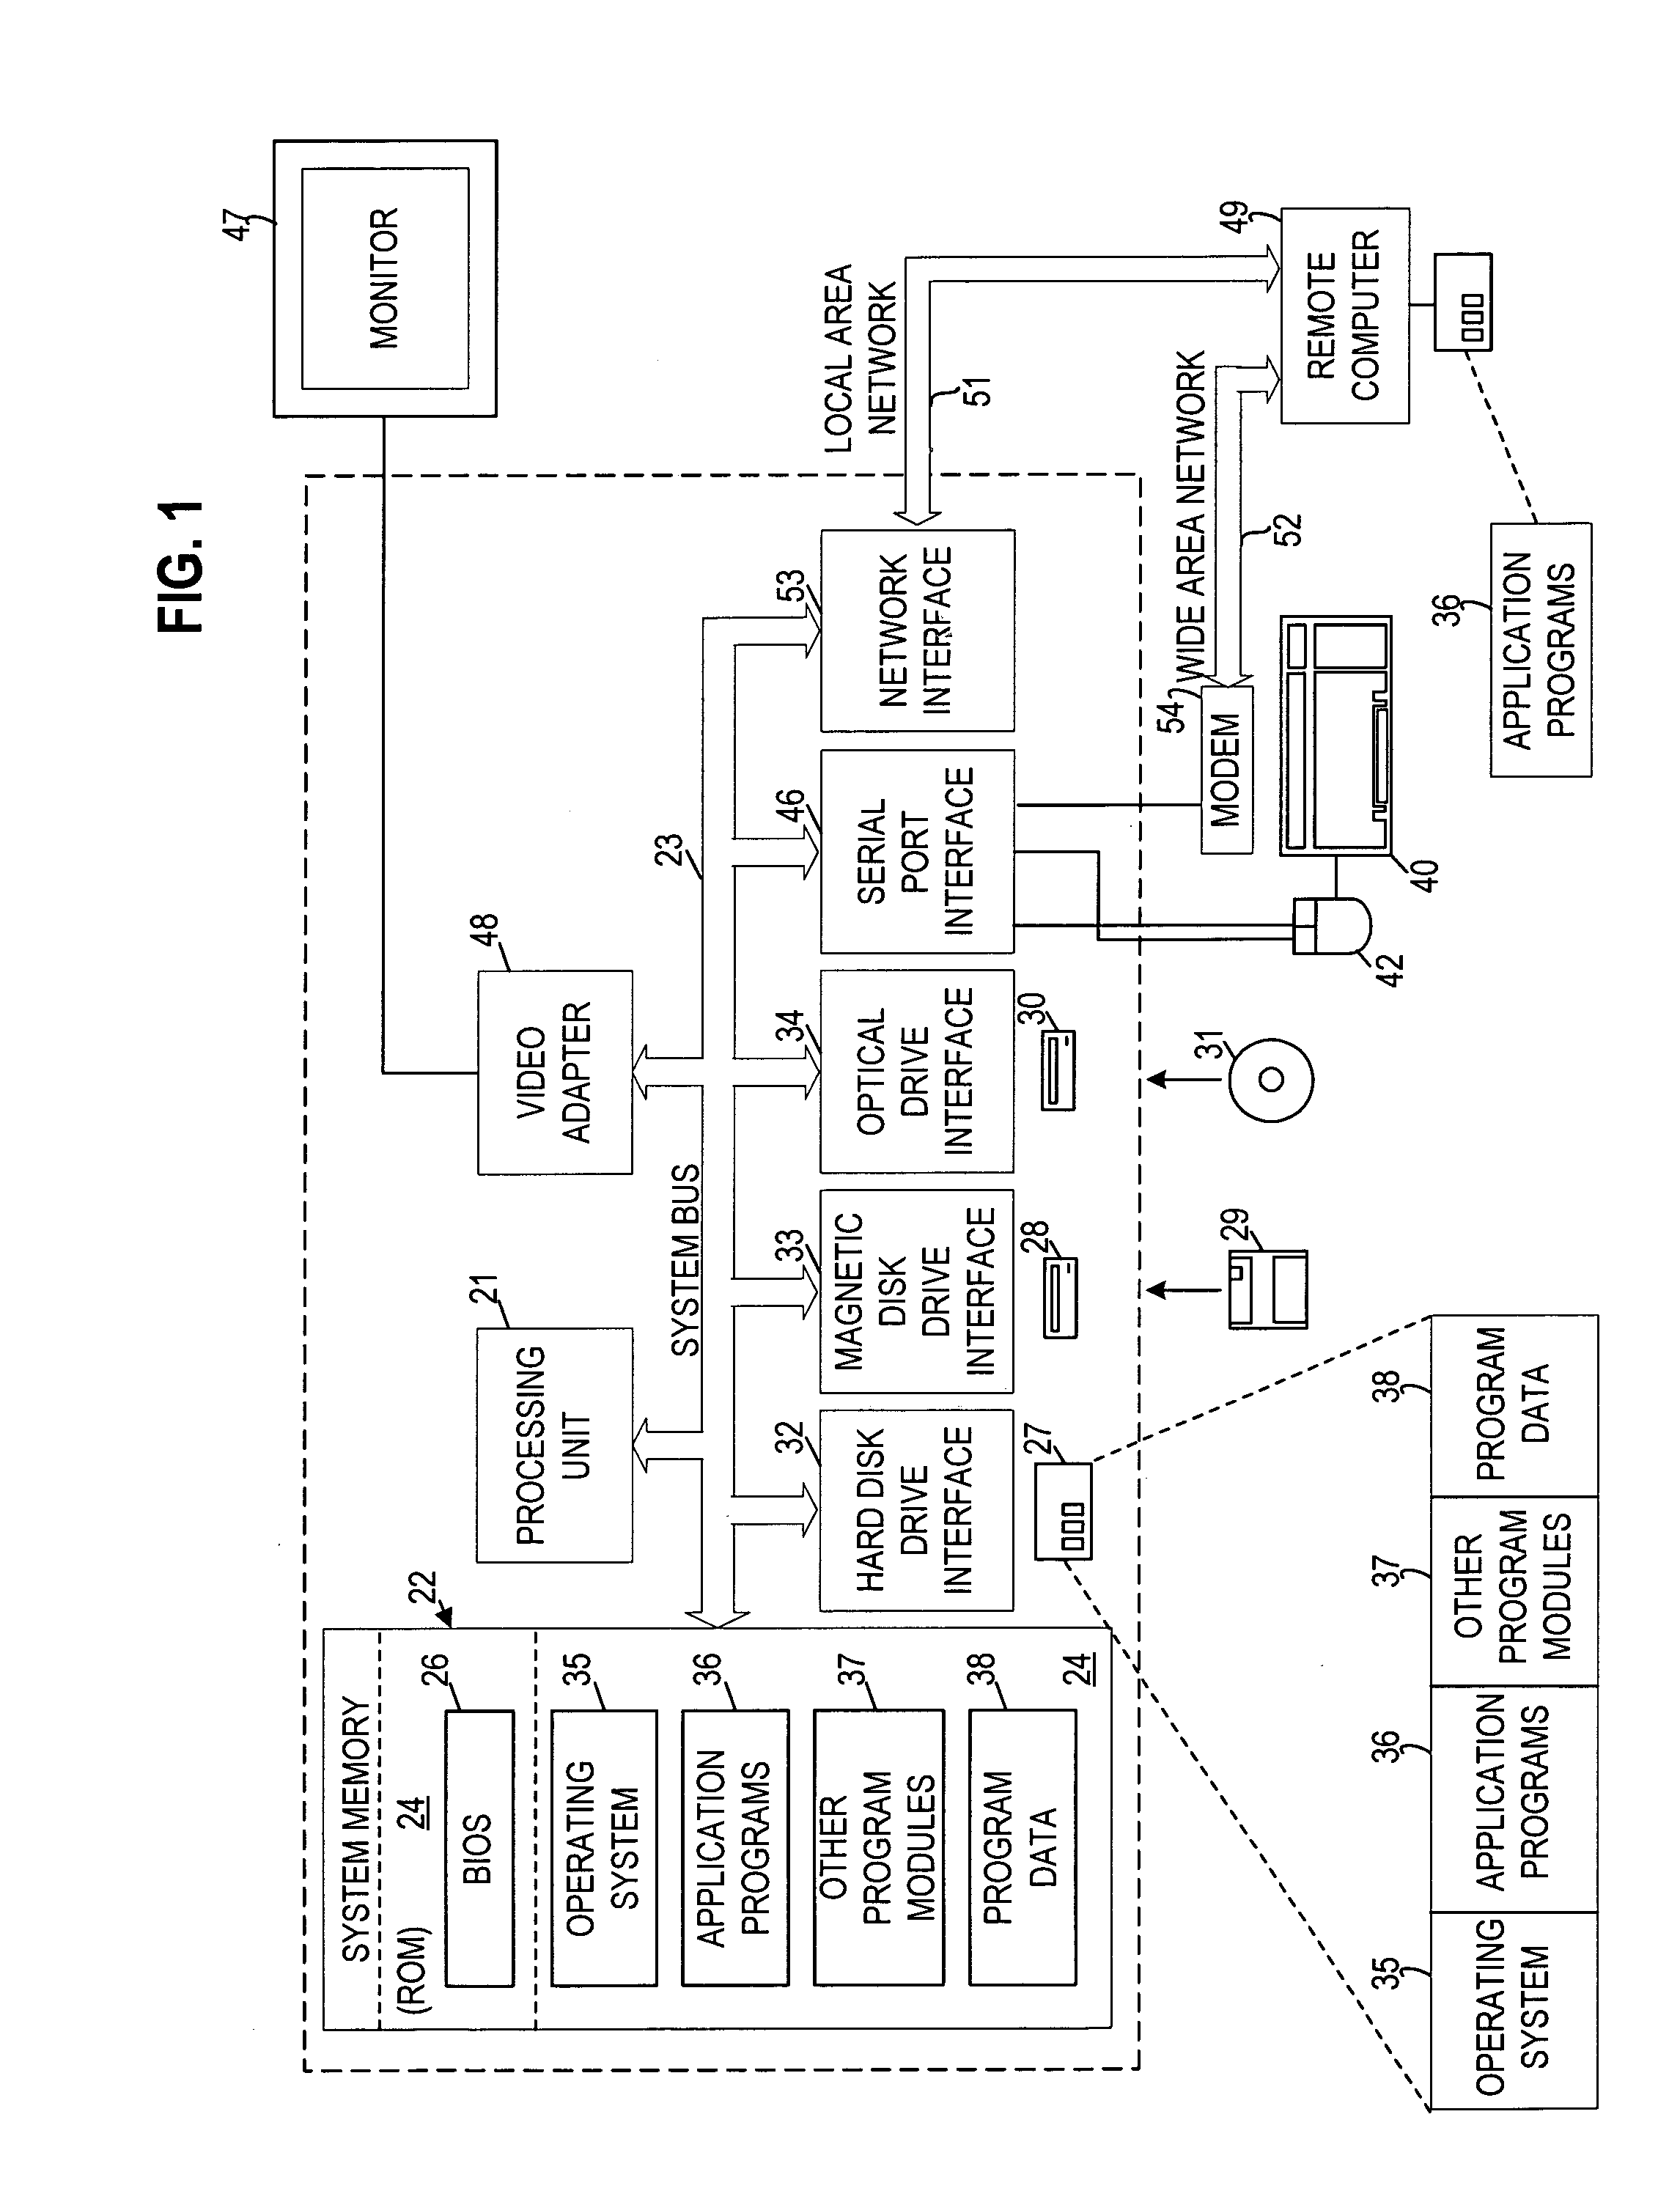 Methods for display, notification, and interaction with prioritized messages